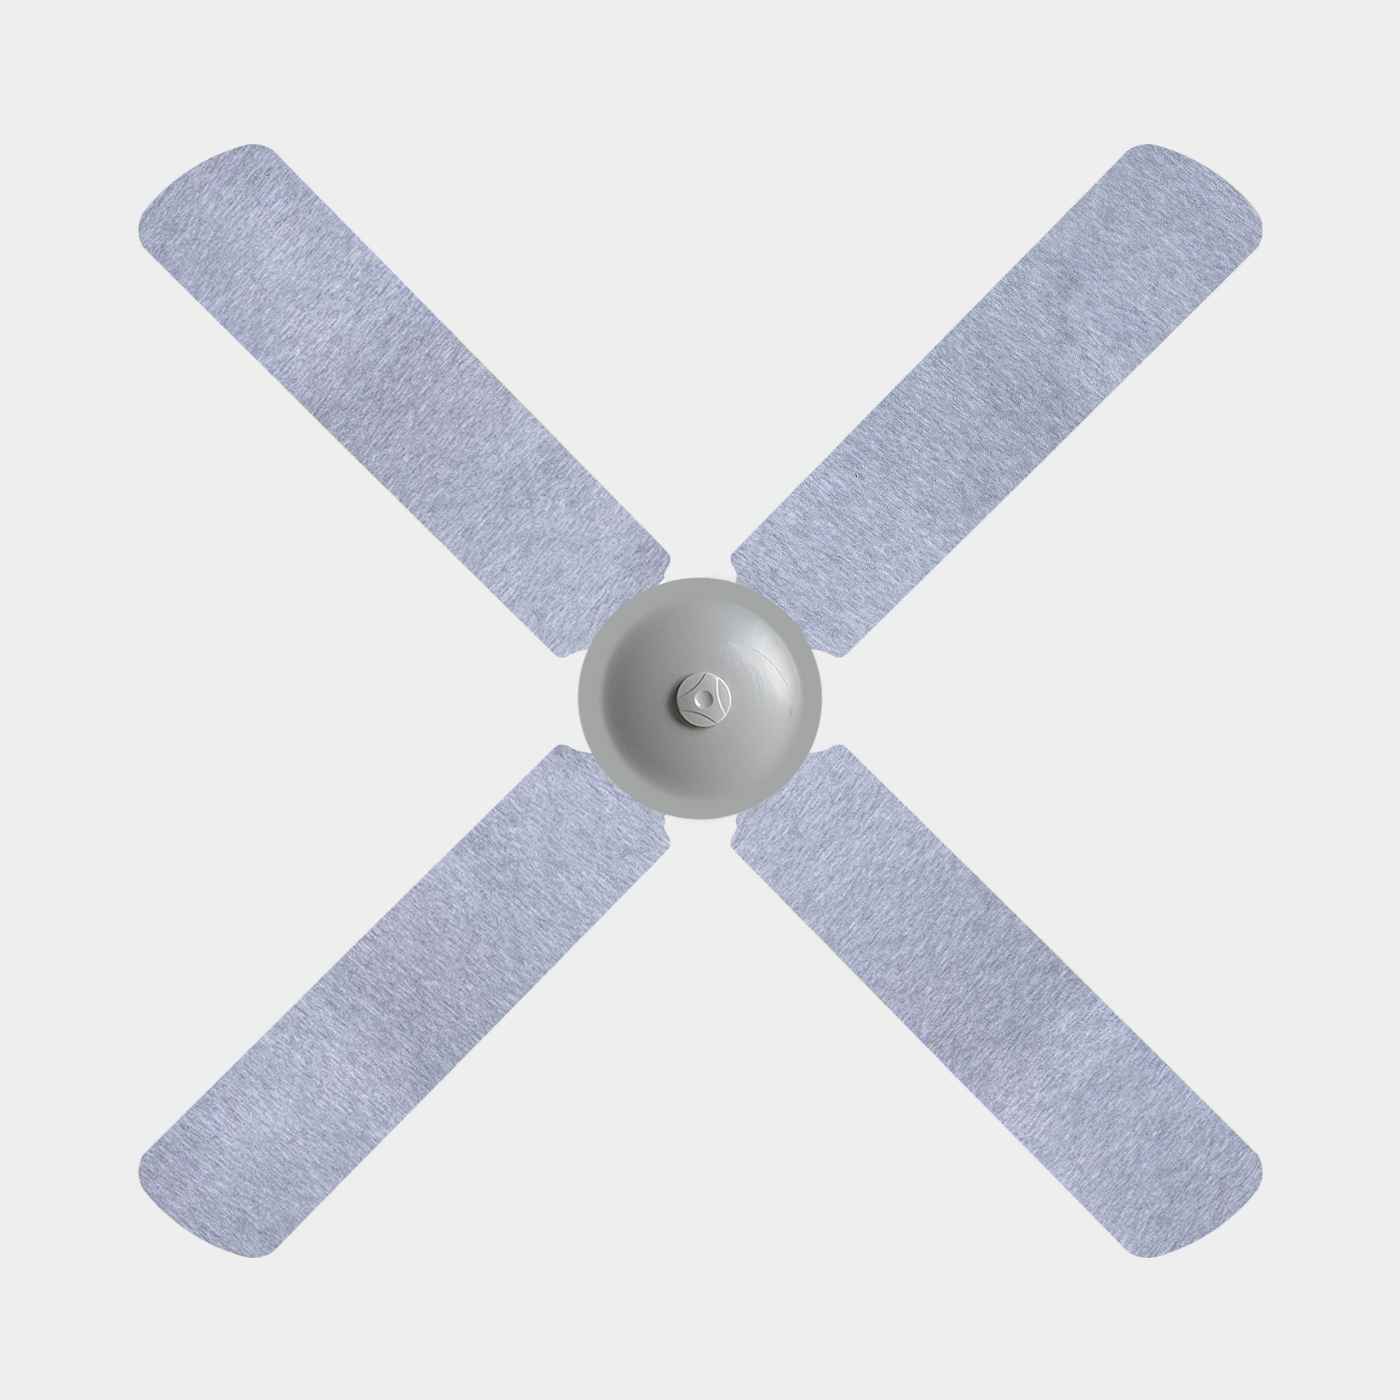 Light grey coloured fan blade covers